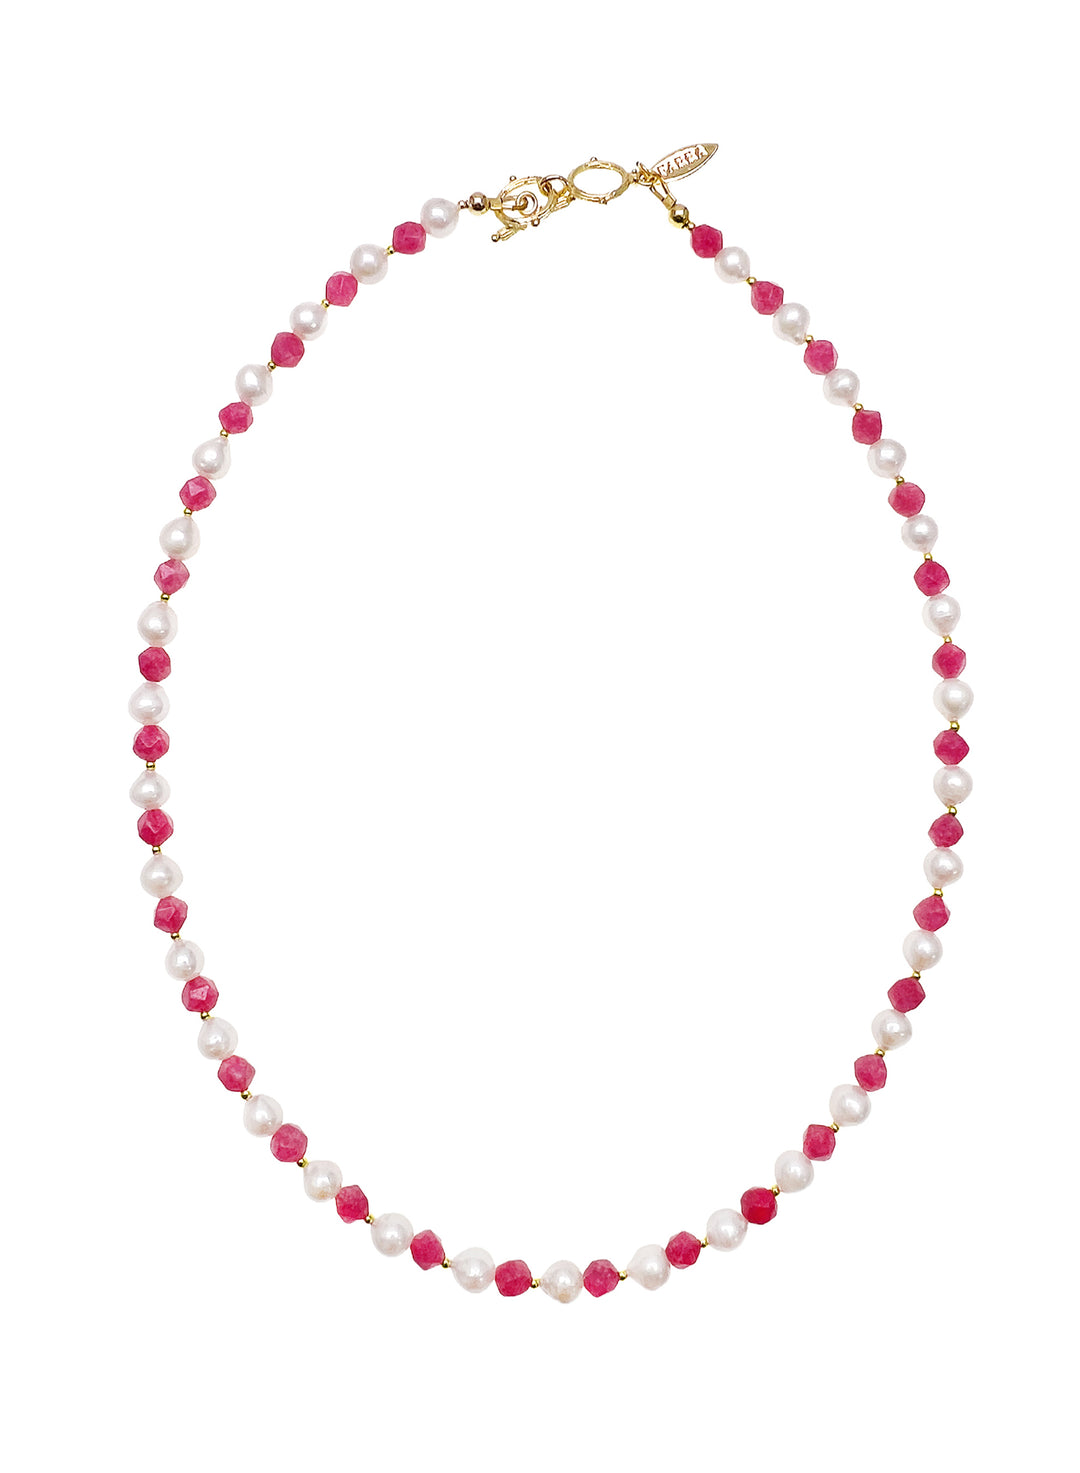 Freshwater Pearls With Pink Gemstone Necklace LN003 - FARRA